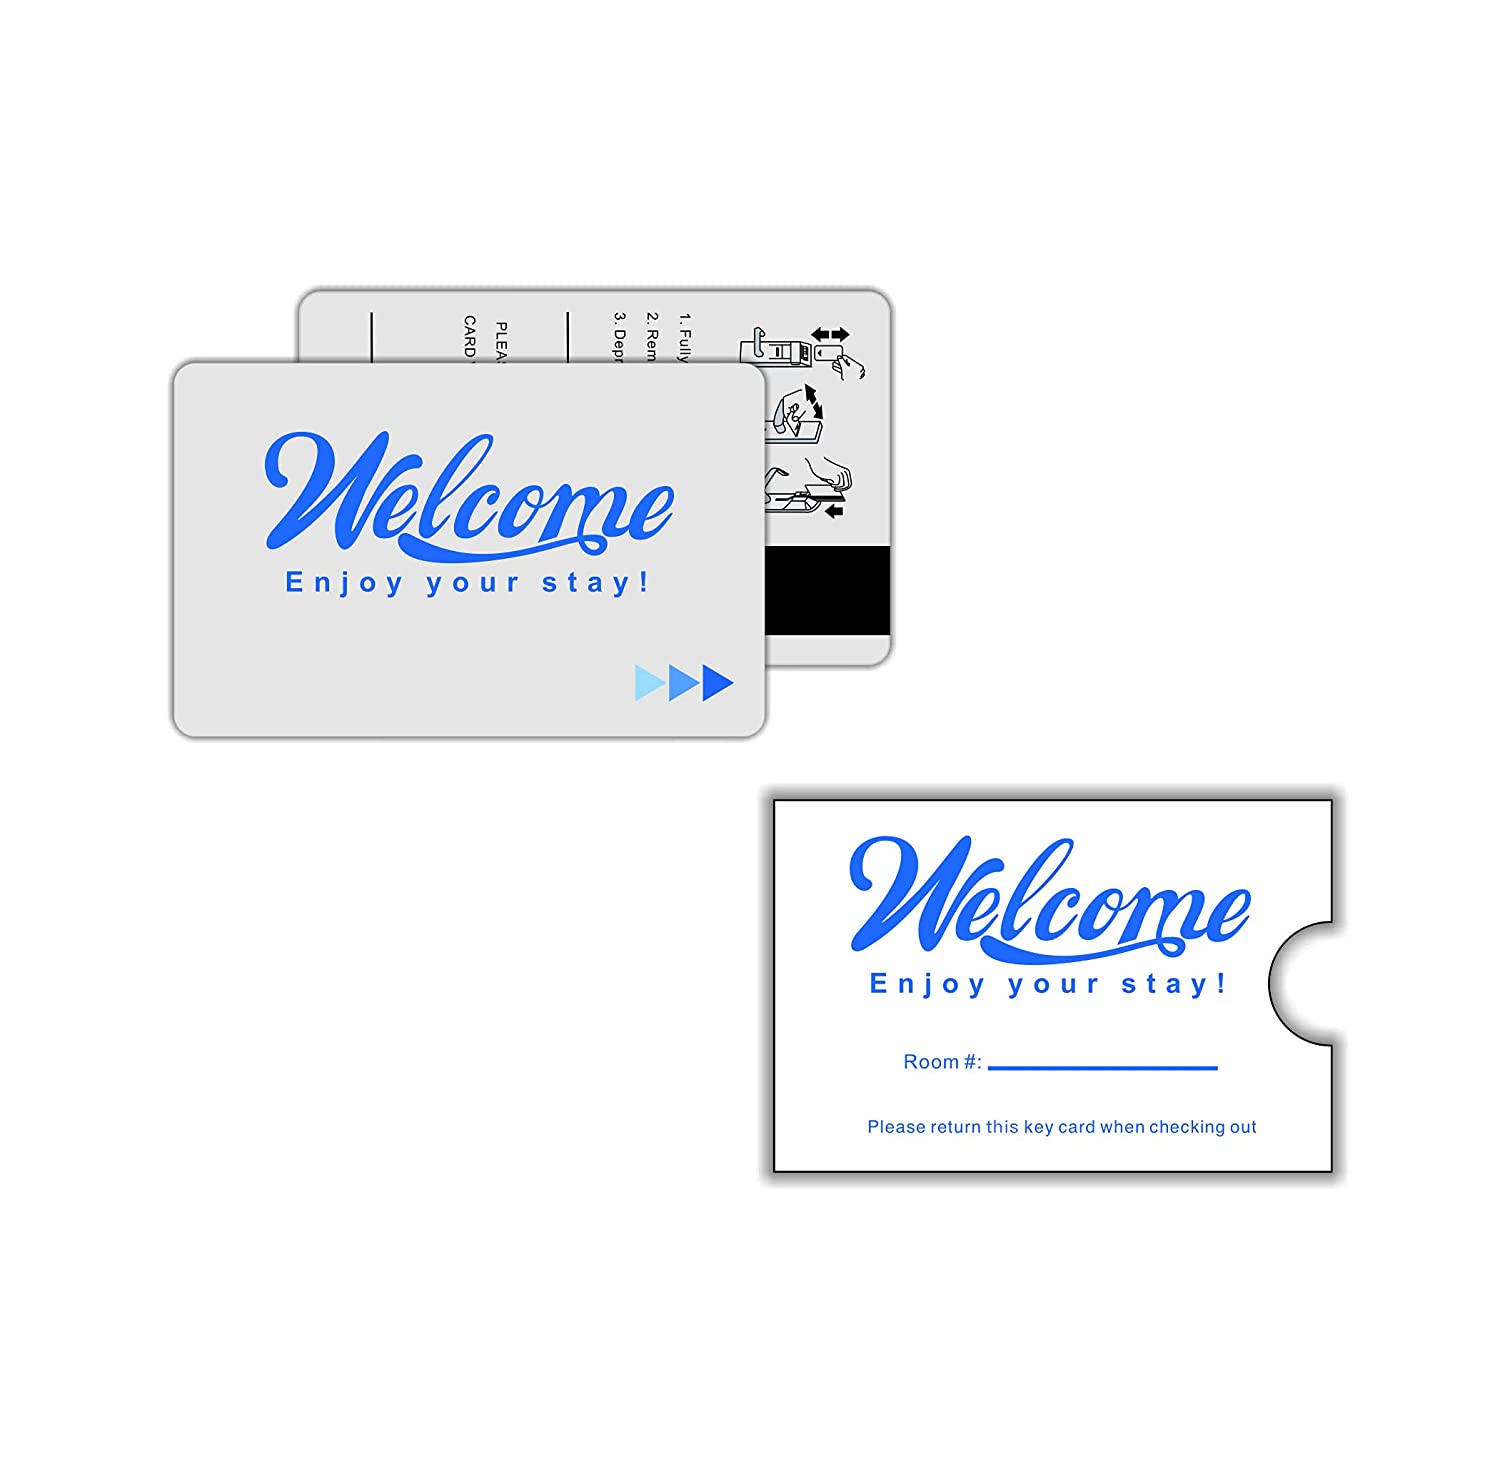 Gialer Hotel & Motel key cards key card with envelopes sleeve welcome enjoy your stay magnetic strip door card